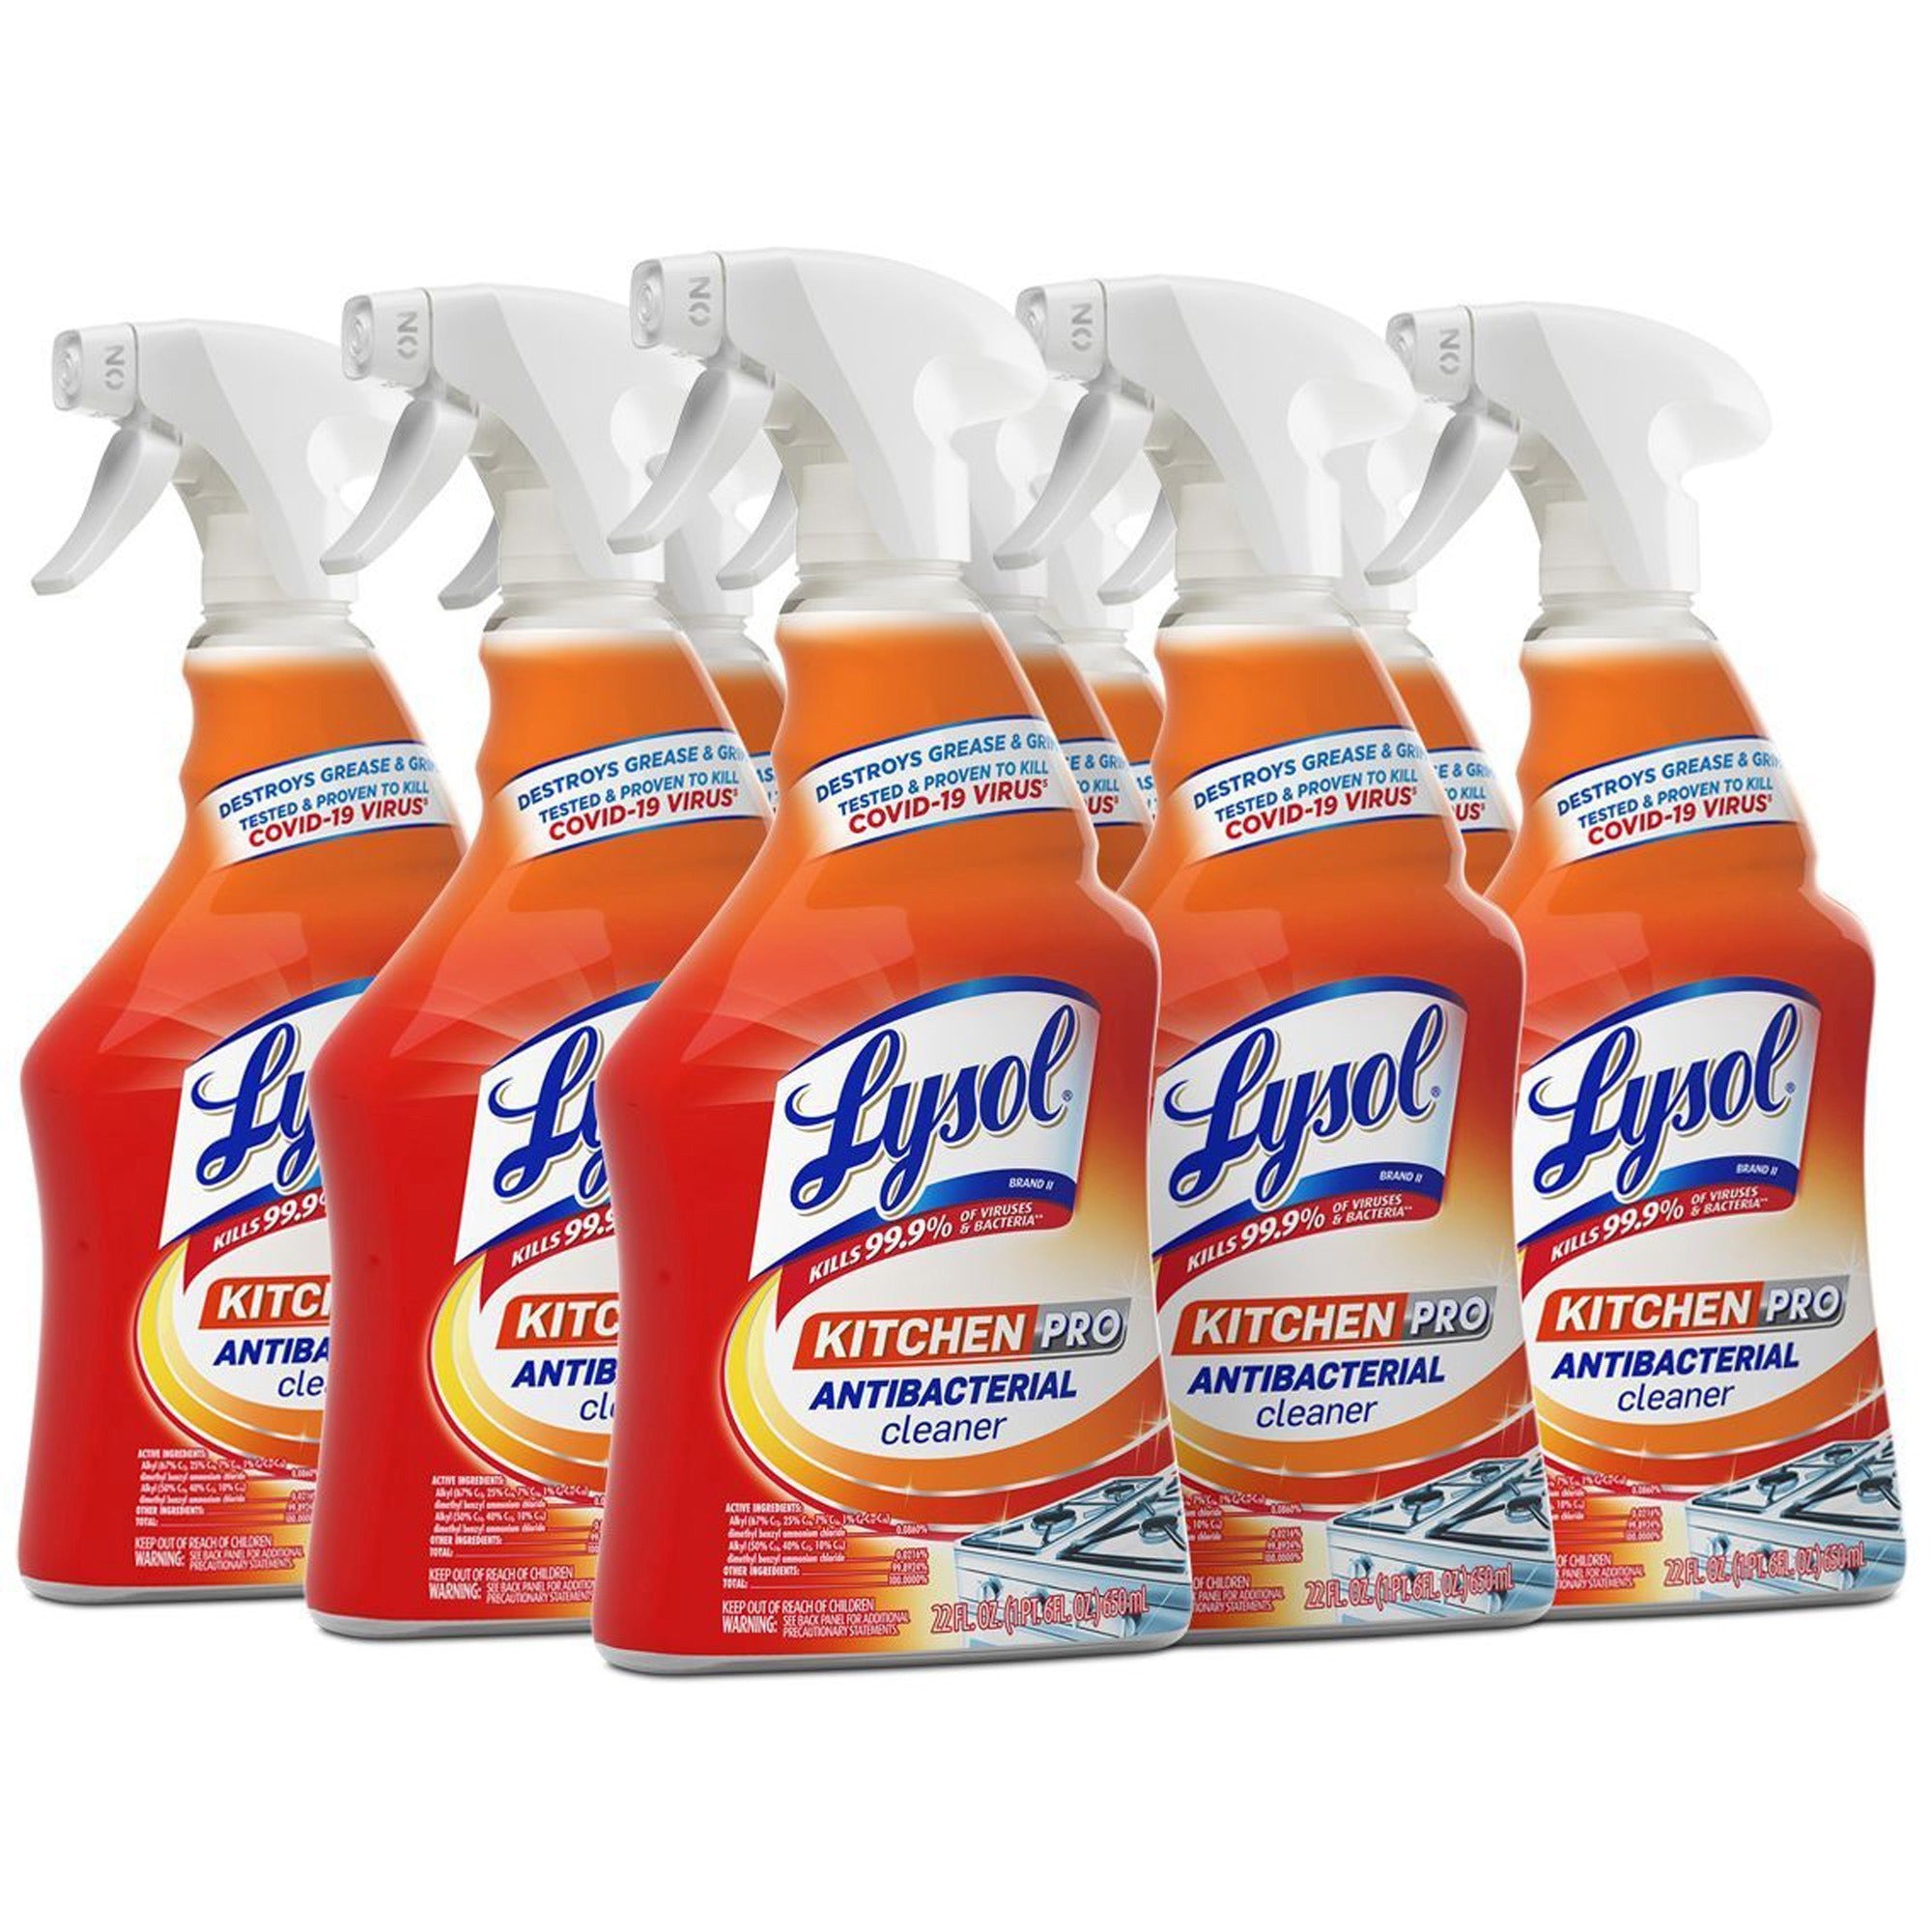 lysol-kitchen-pro-antibacterial-cleaner-for-multi-surface-22-fl-oz-07-quart-fresh-citrus-scent-9-carton-deodorize-streak-free-chemical-free-disinfectant-anti-bacterial-residue-free-clear_rac79556ct - 1